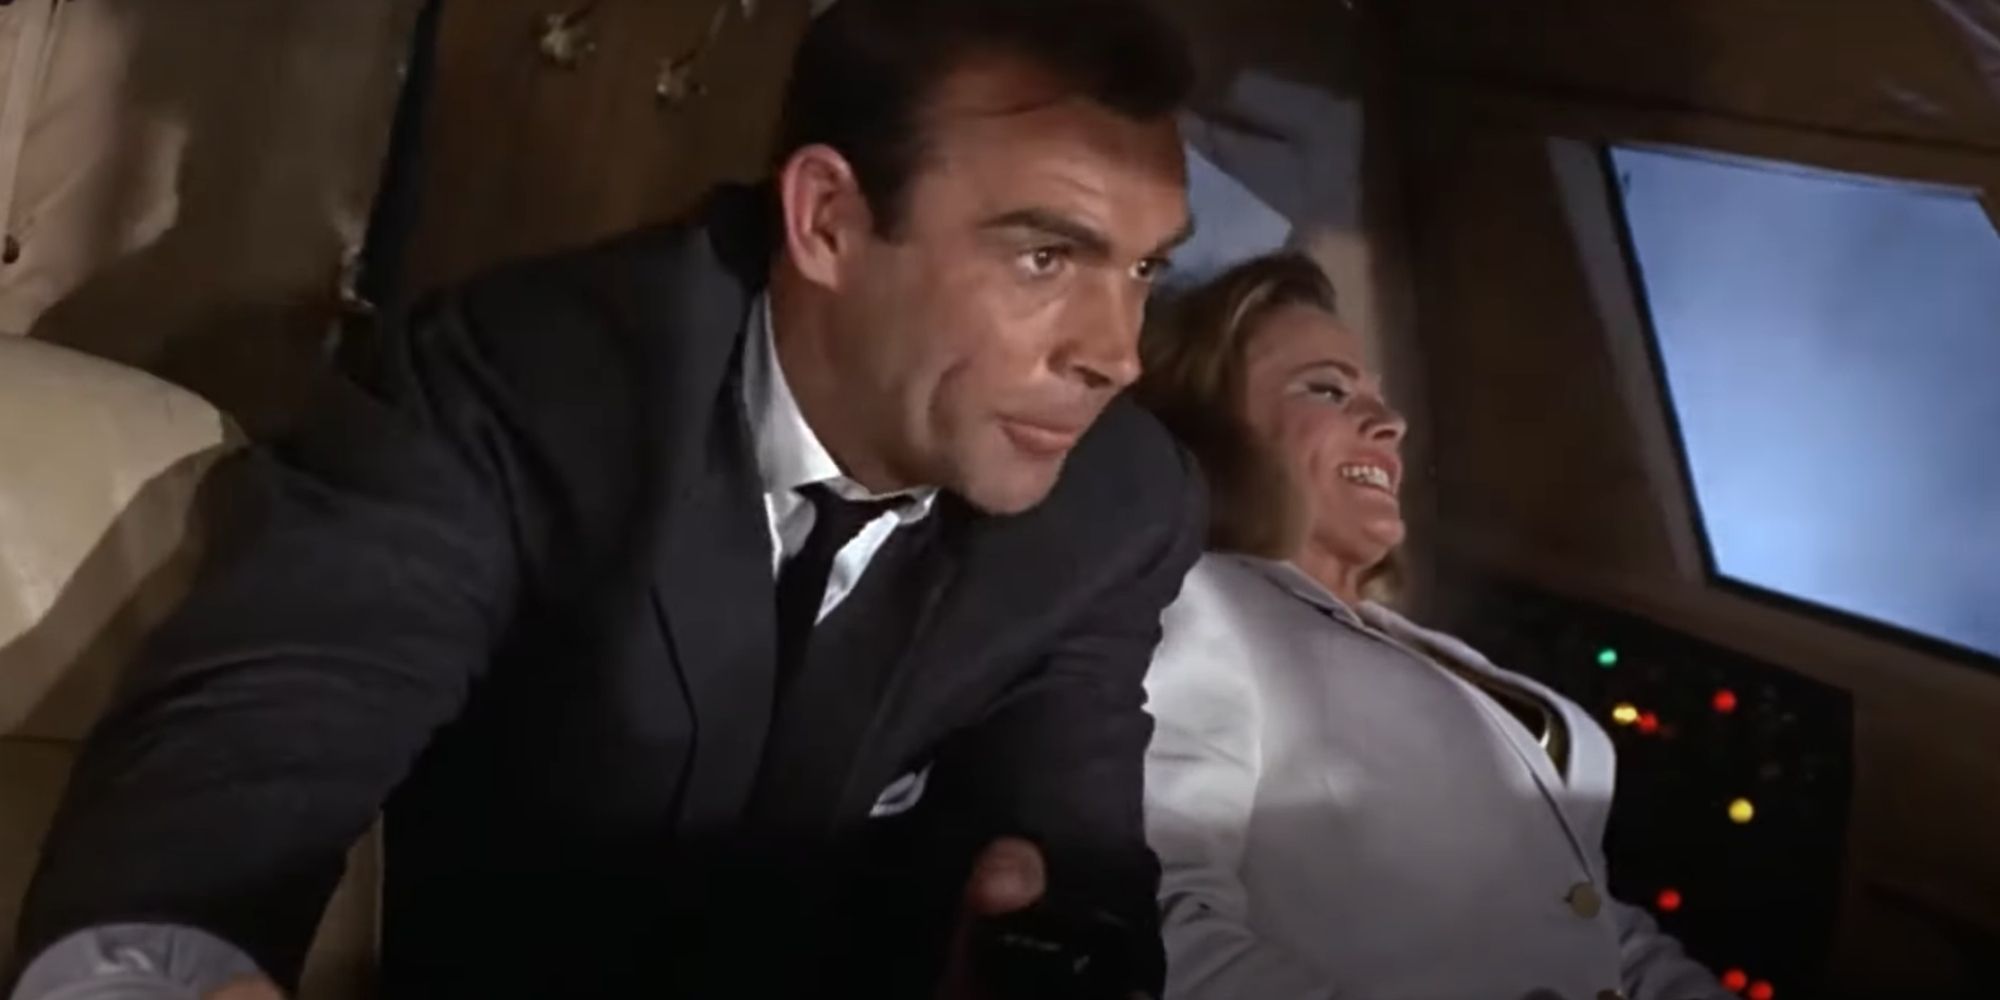 Bond and Pussy Galore search for a plan to escape the crashing plane 